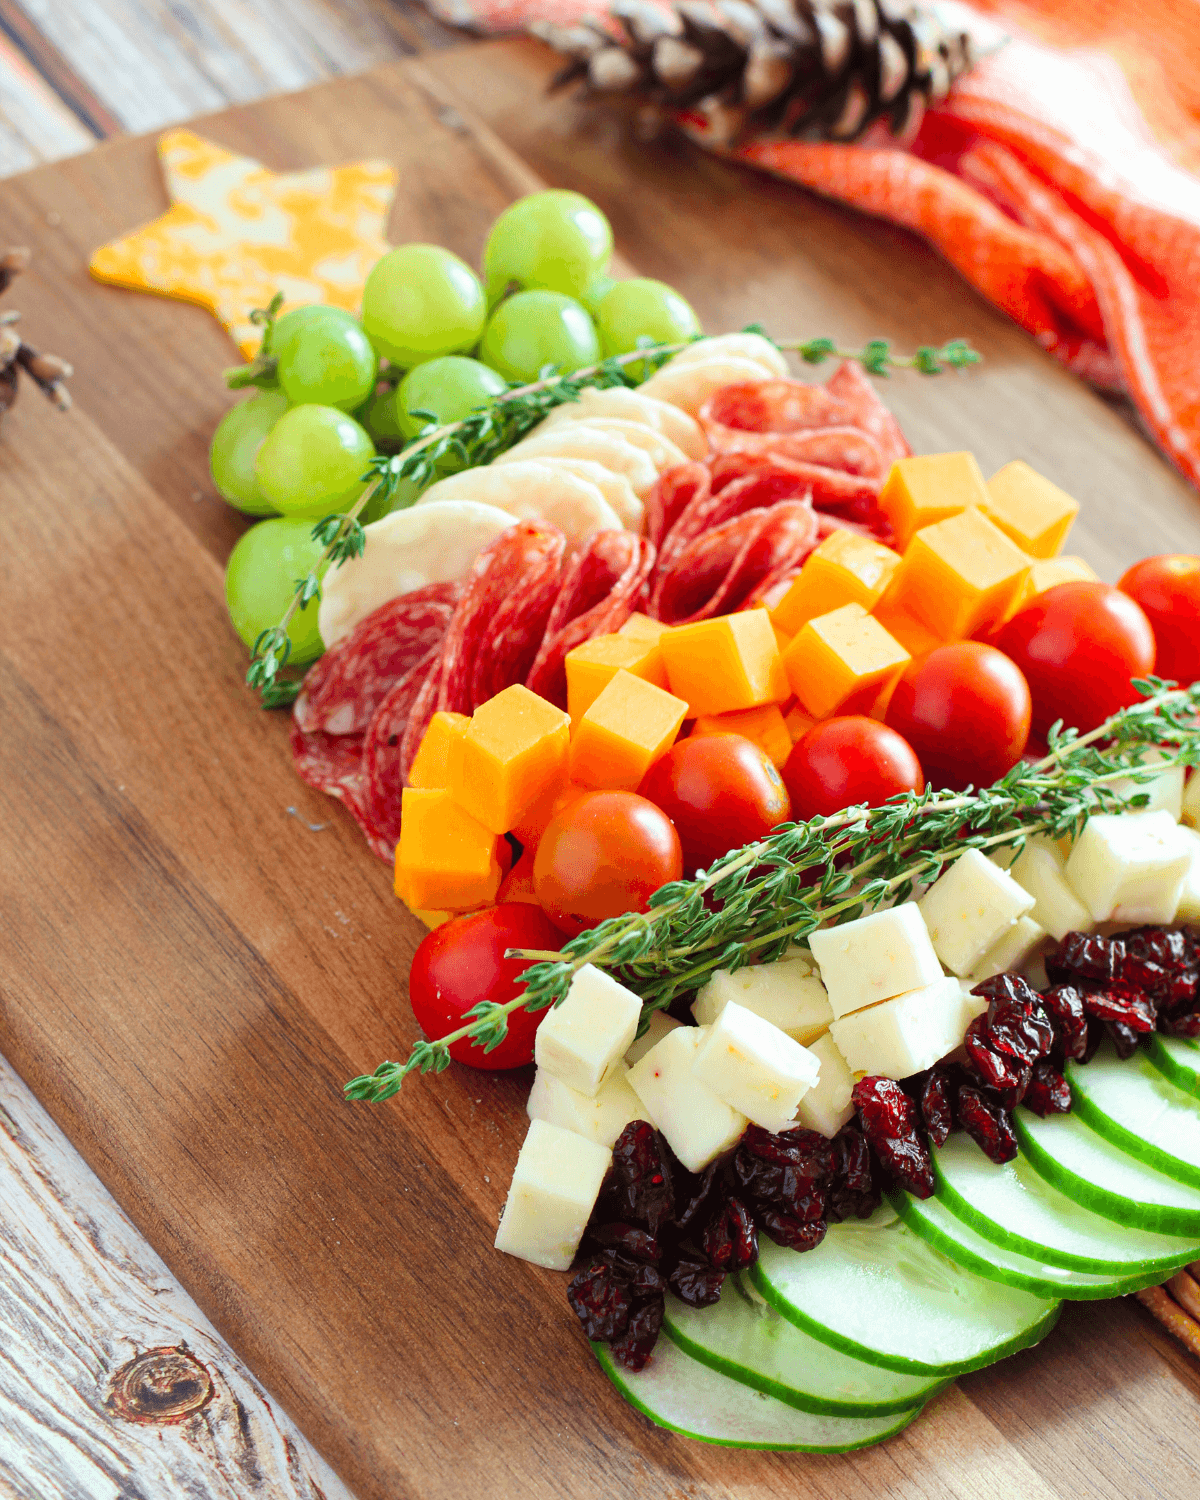 A cutting board with vegetables, meats and cheeses.